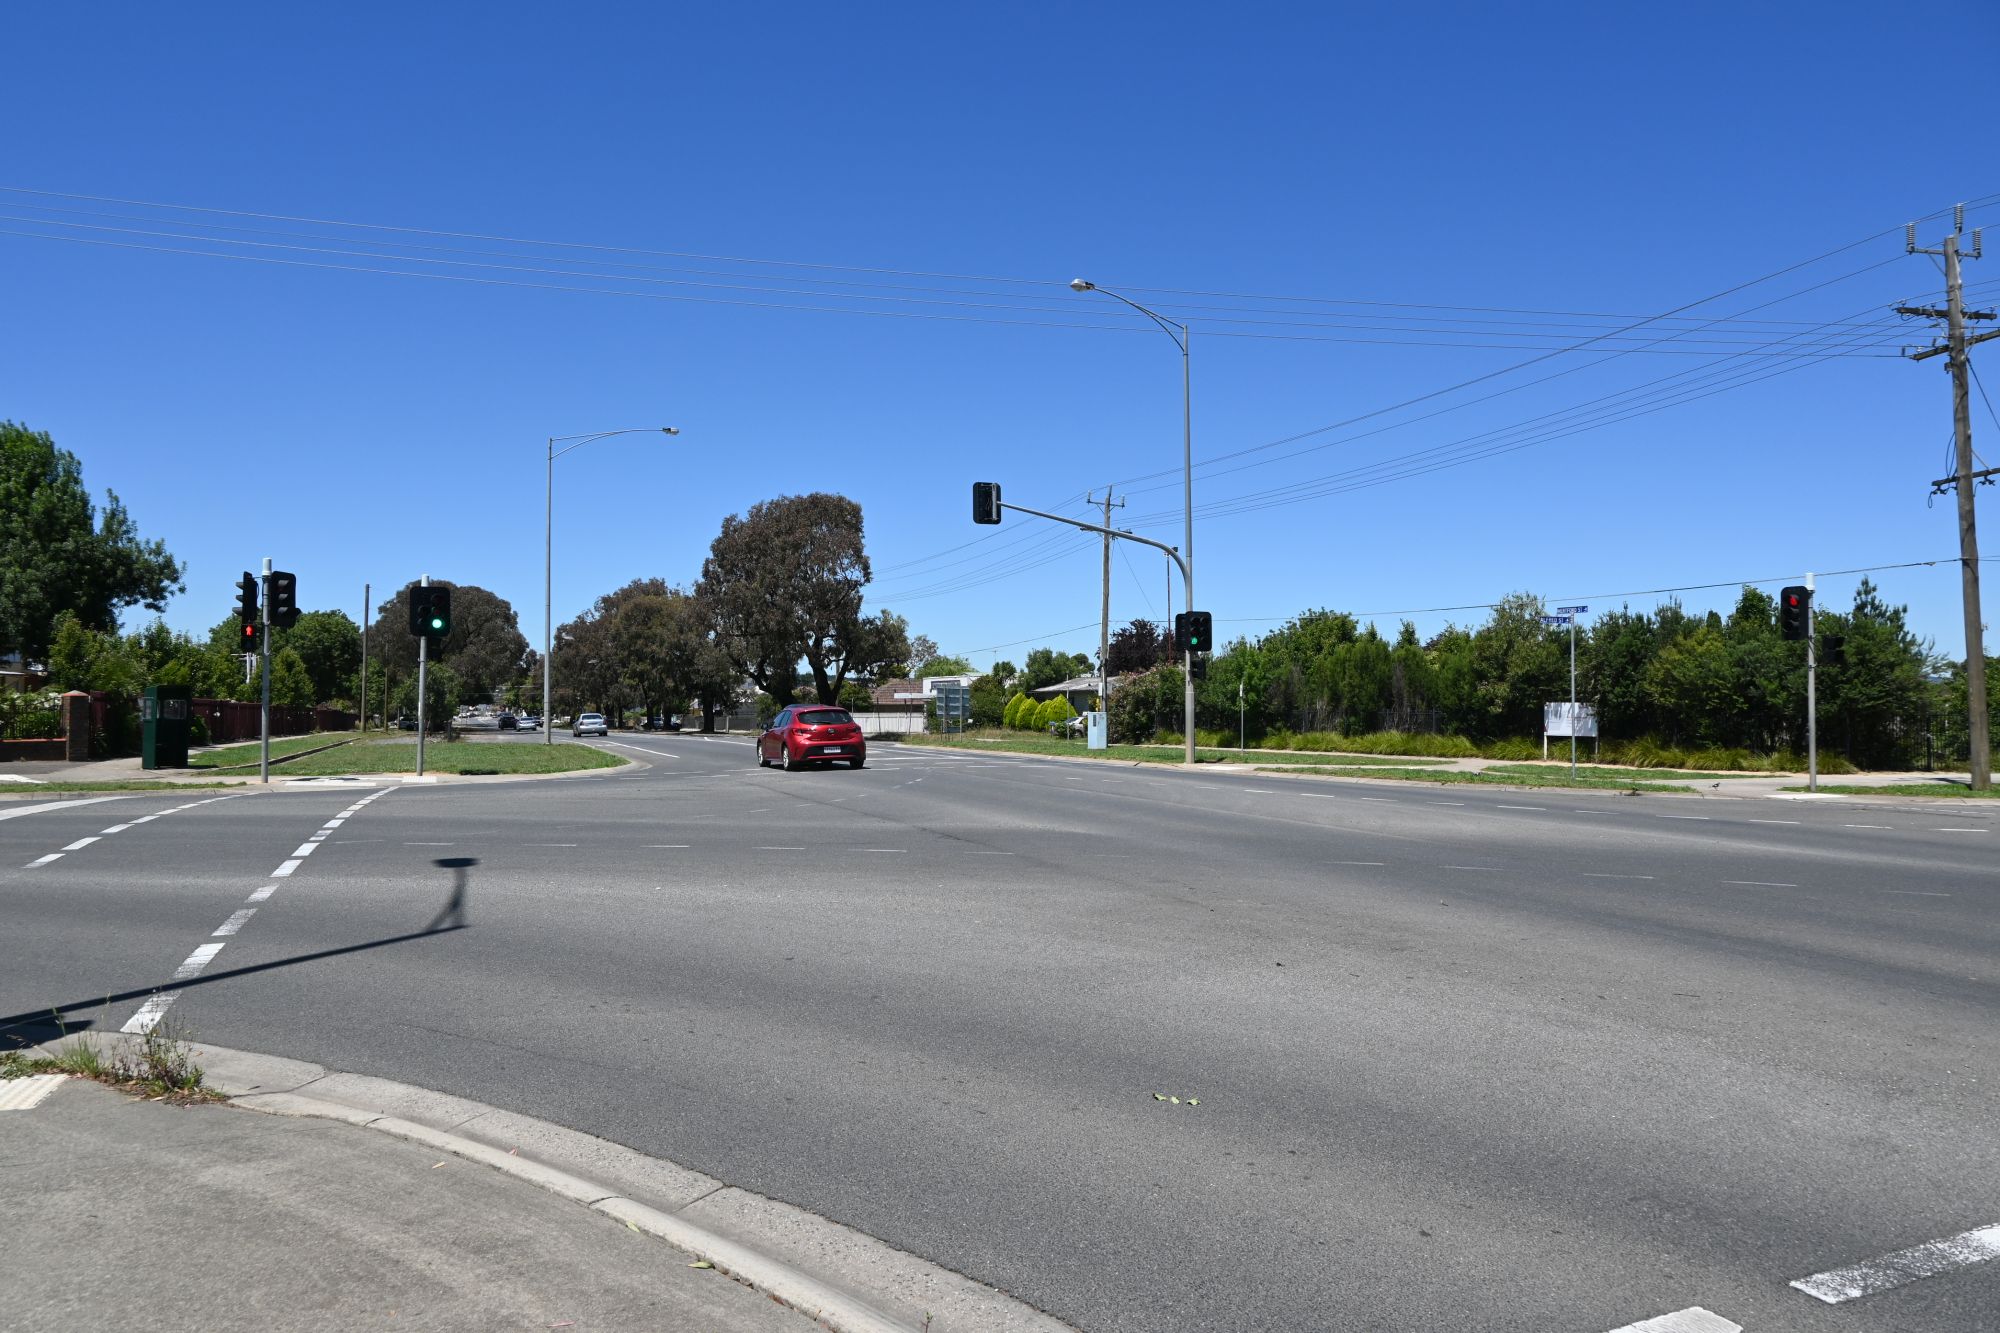 Generic image of intersection of Glenelg Highway and Alfred Street